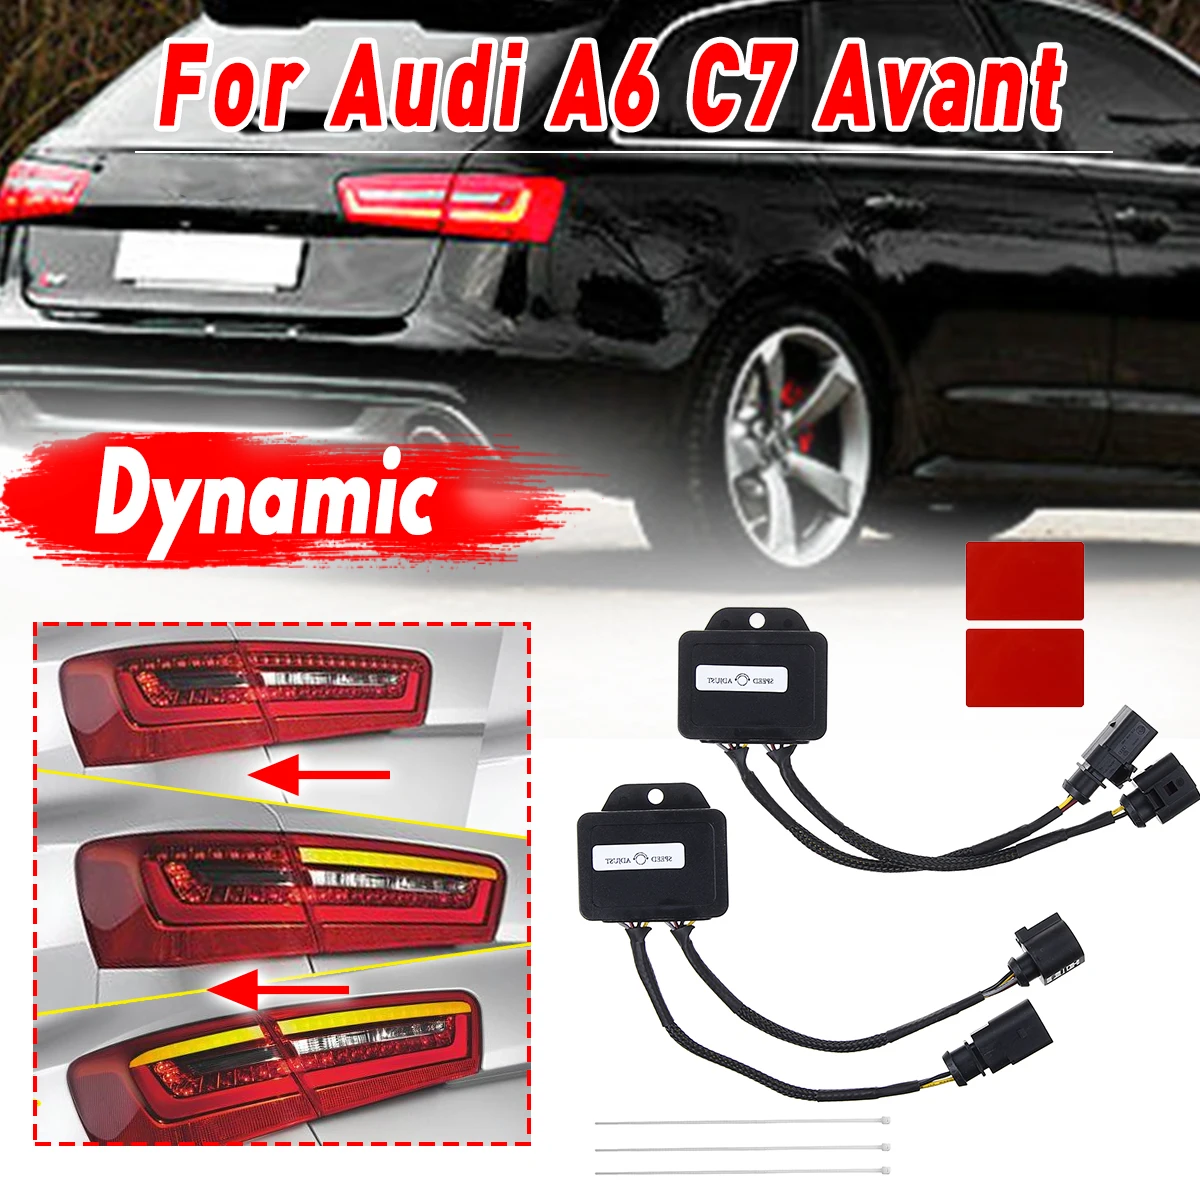 Dynamic Blinker Signal Indicator Tail Light Module Controller For Led Taillights For Audi A6 C7 Avant 4g 2012-2014 - Signal Lamp - AliExpress